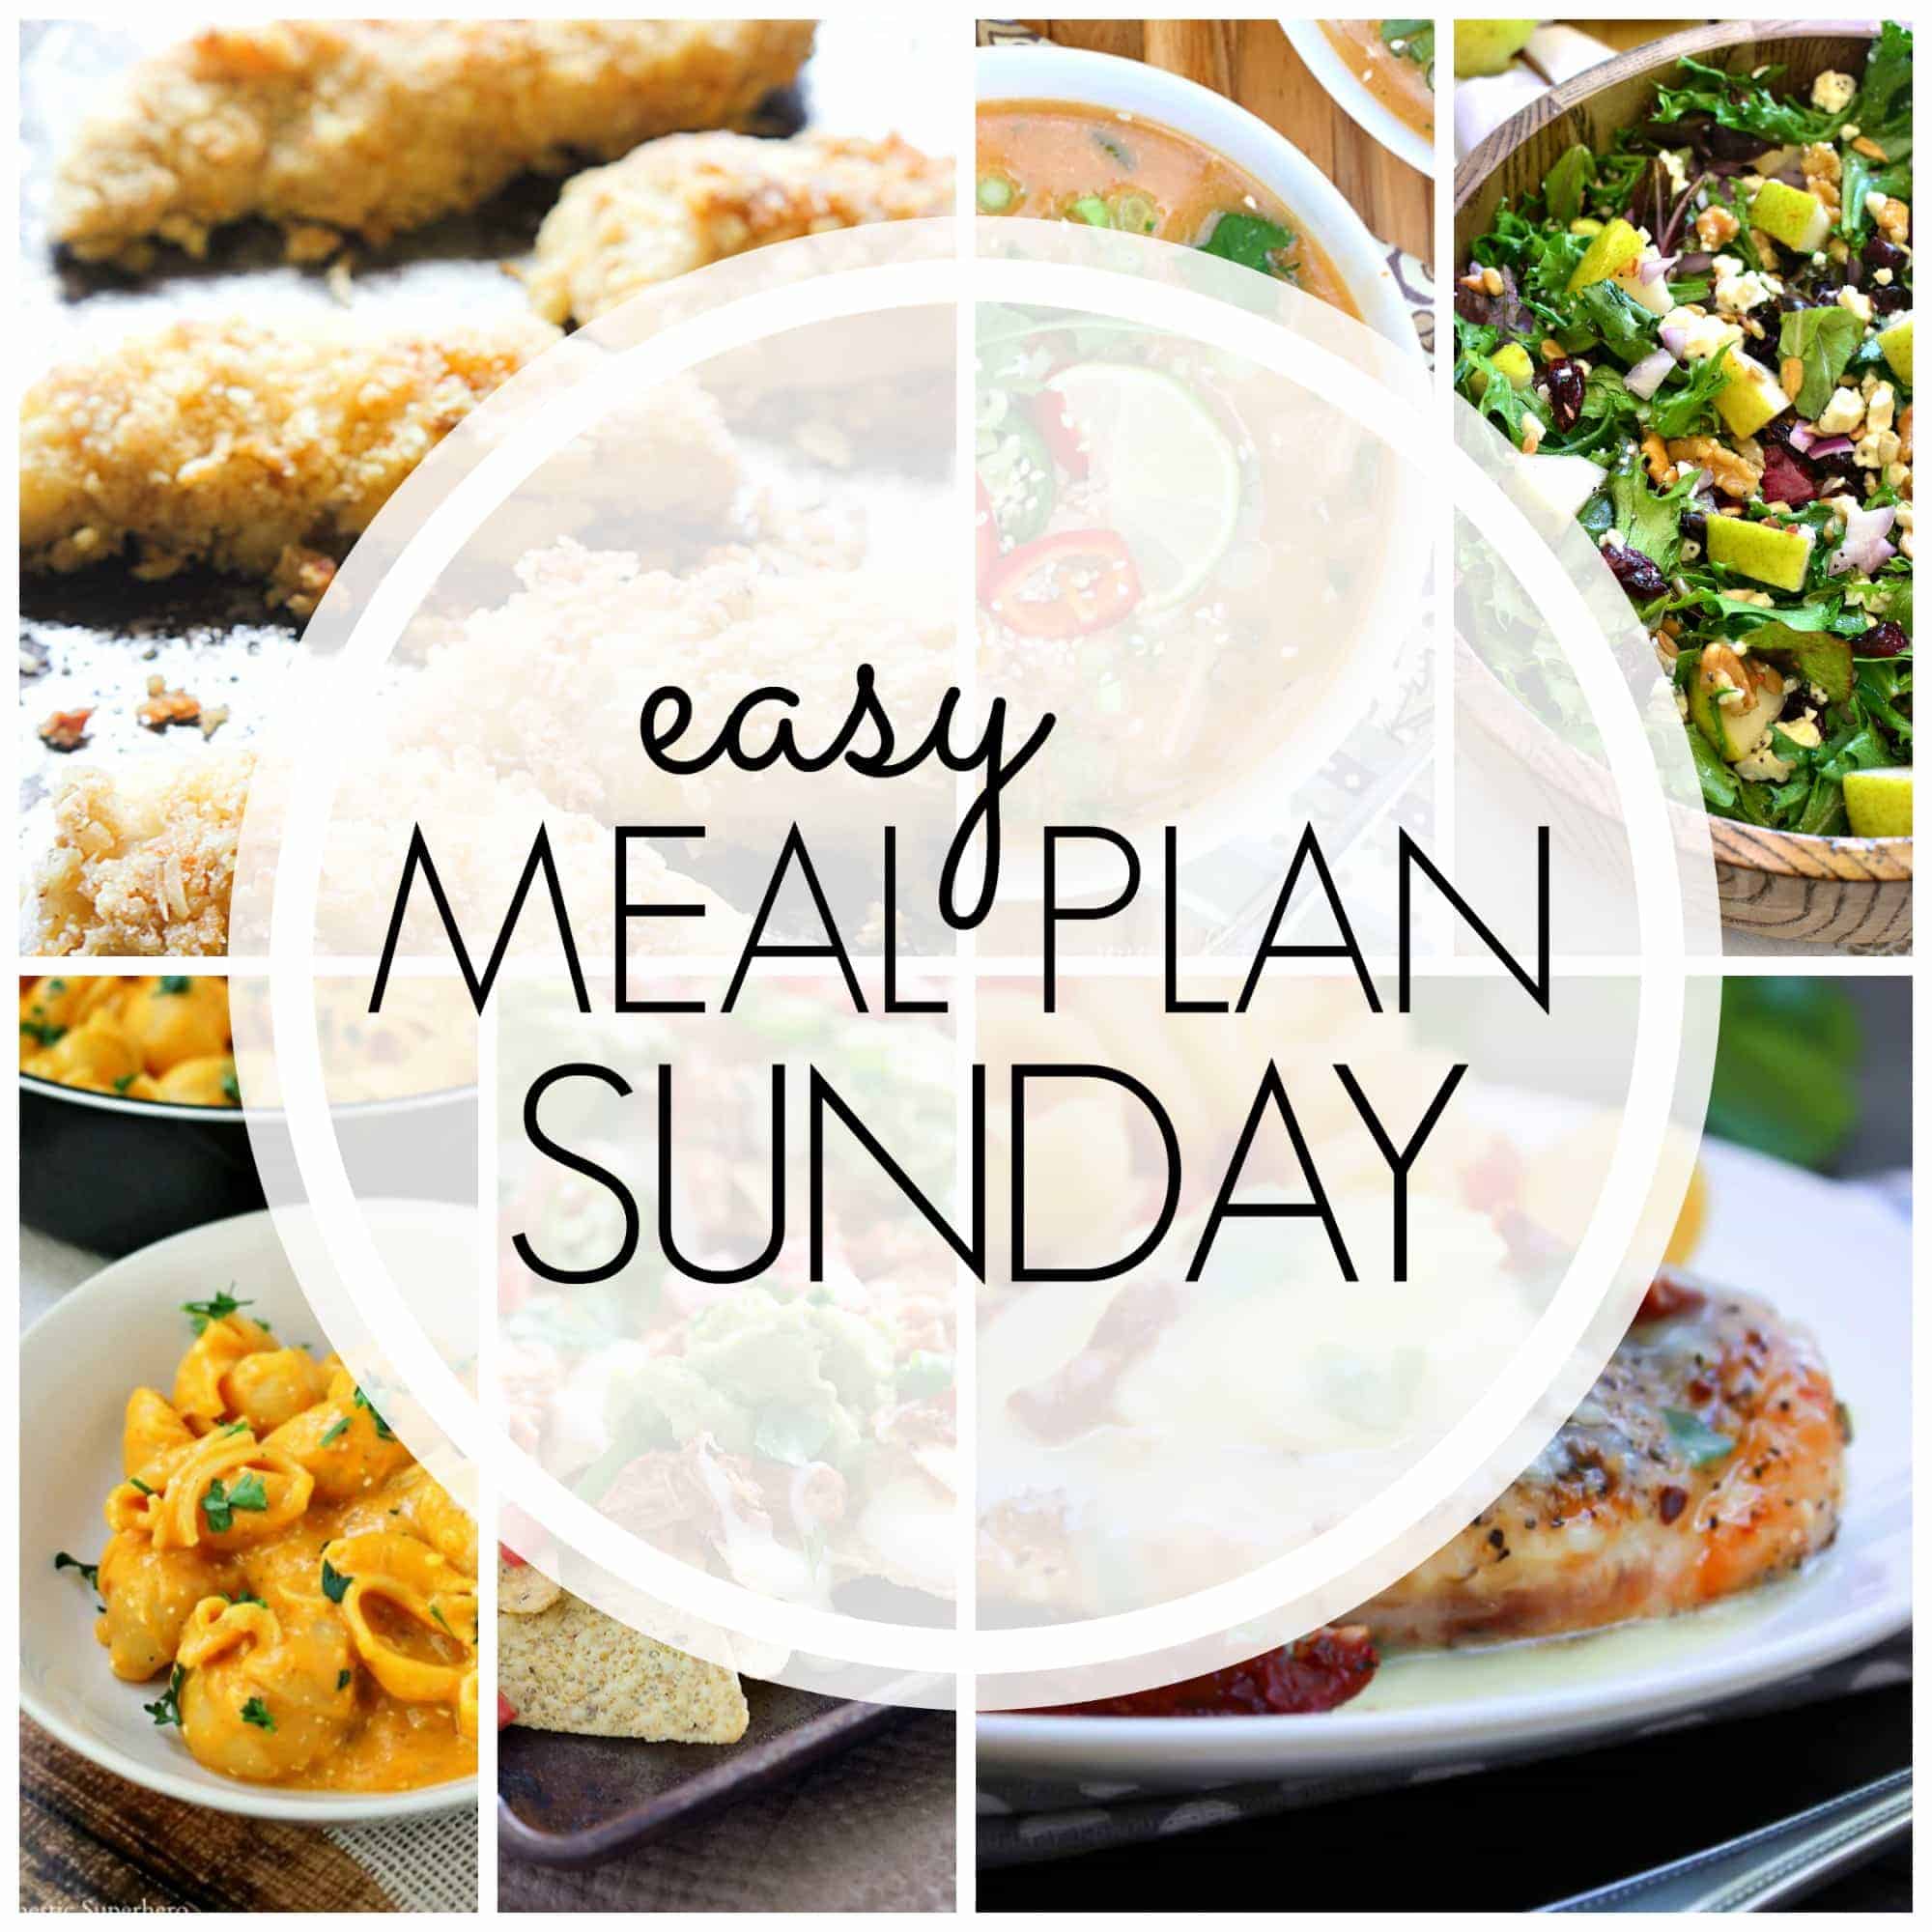 Easy Meal Plan Sunday {Week 66} – these six dinners, two desserts and a breakfast recipe will help you remove the guesswork from this week’s meal planning. Enjoy!